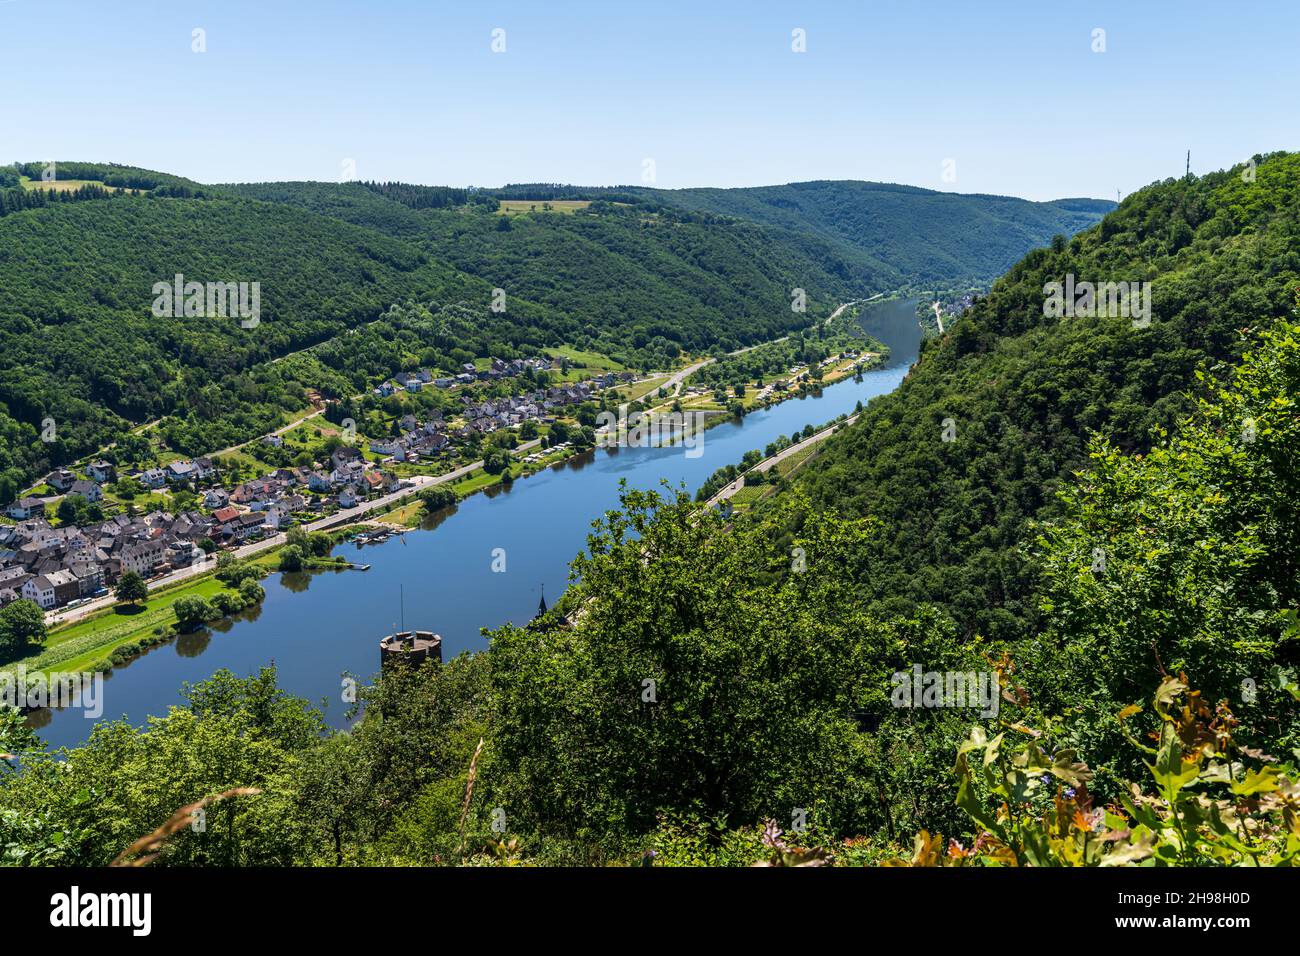 Lasserg, Rhineland-Palatine, Germany - June 14, 2021: View at the River Moselle and the town of Burgen Stock Photo